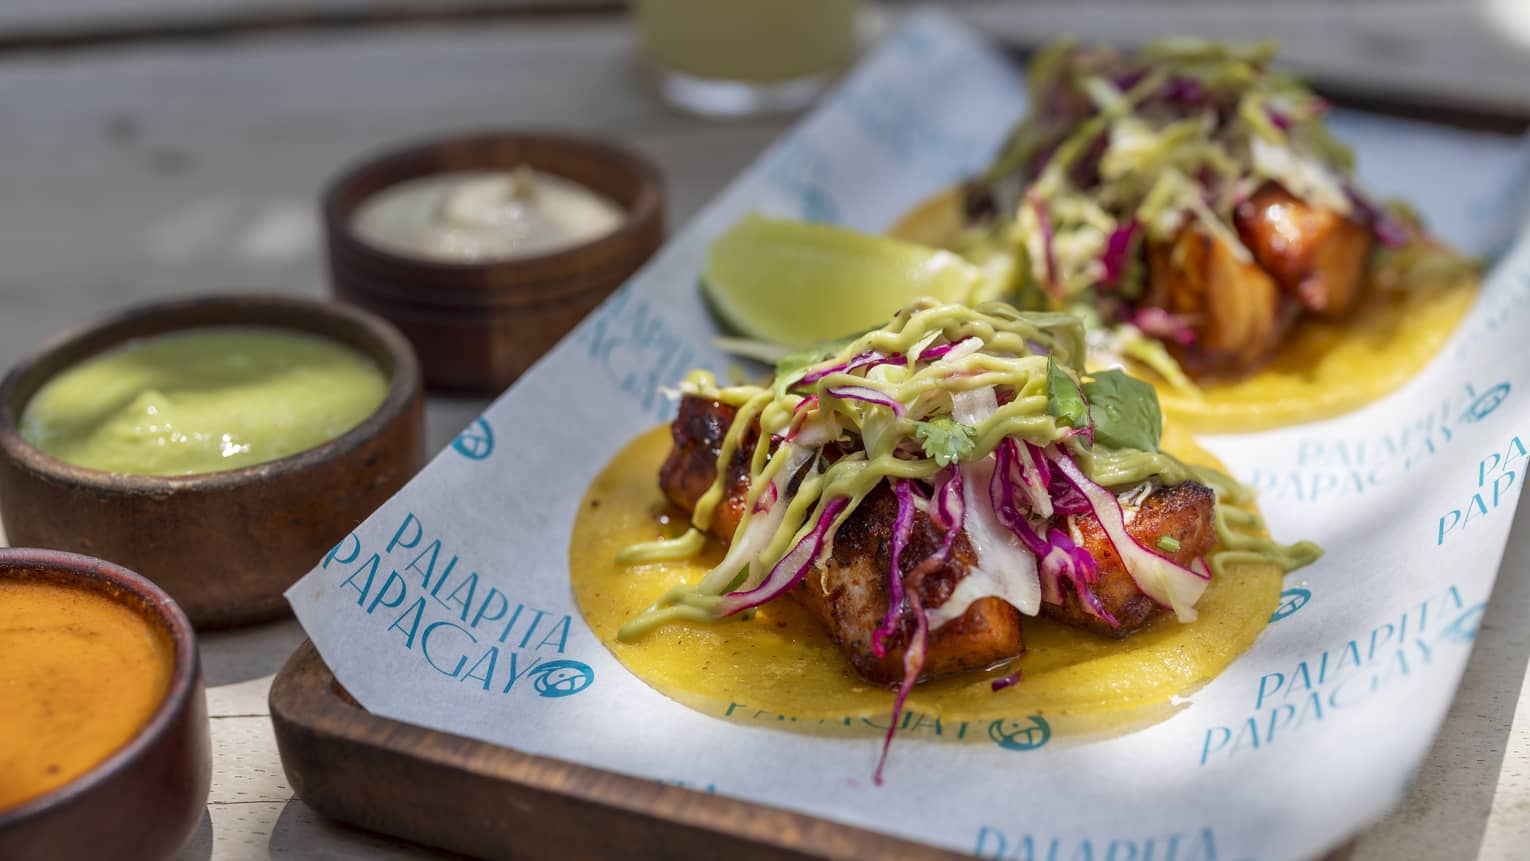 Two fish tacos sit open-faced on a paper-lined wood platter with three small wooden bowls of sauces on the side